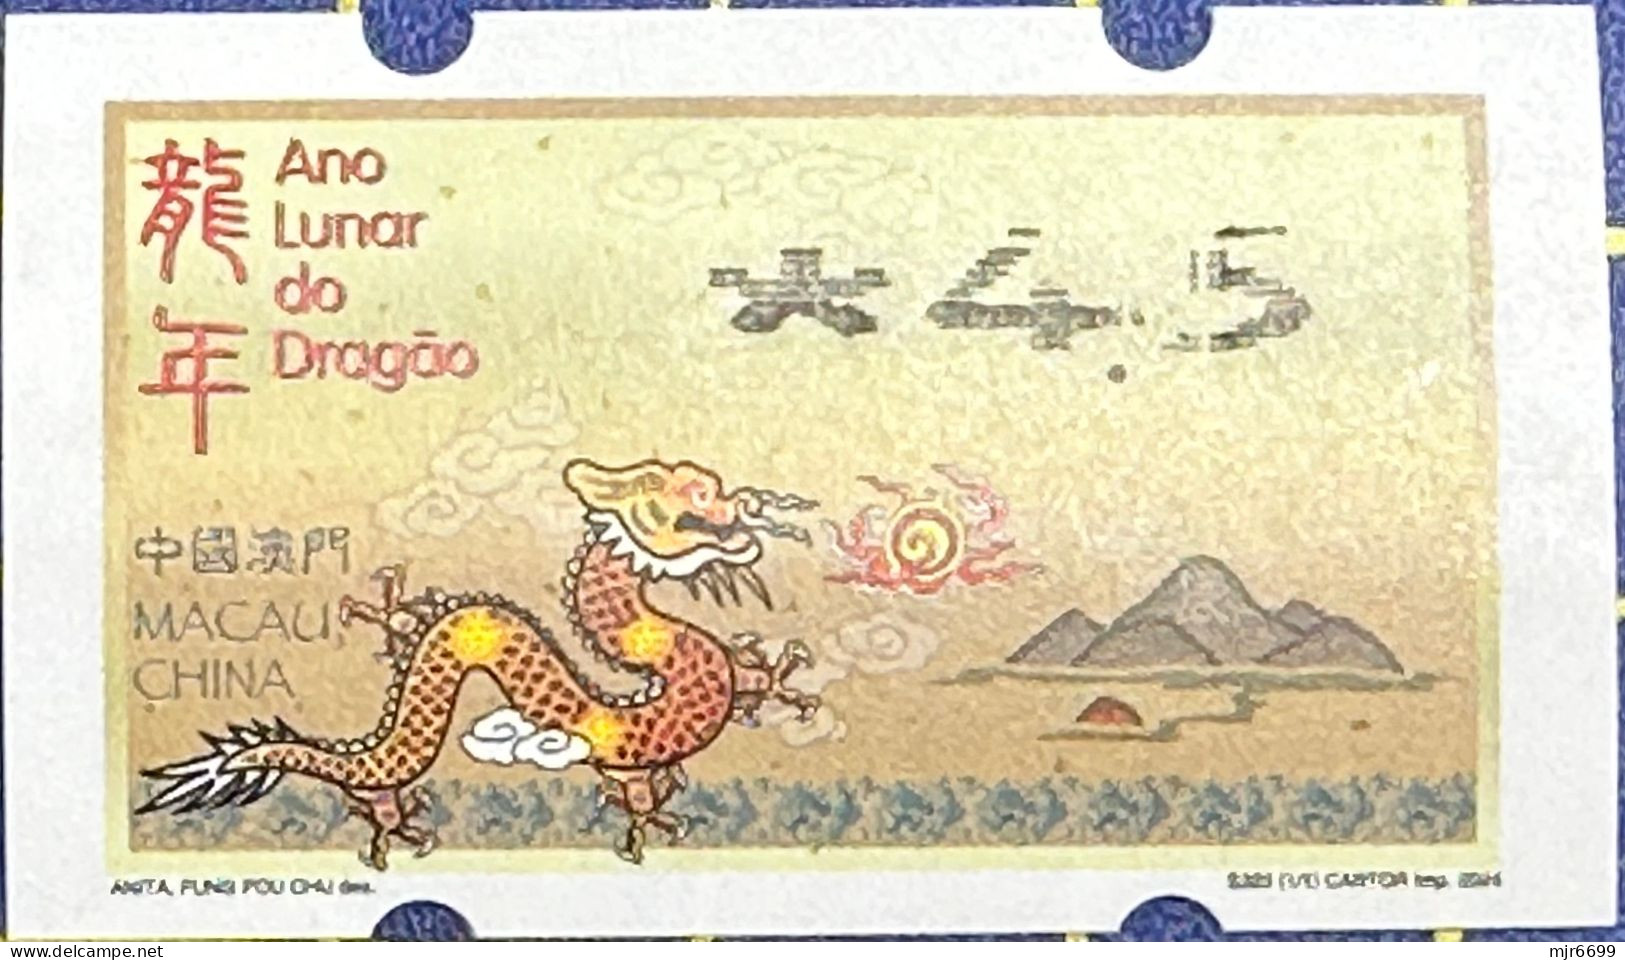 2024 LUNAR NEW YEAR OF THE DRAGON NAGLER MACHINE ATM LABEL 4.5 PATACAS - Automaten